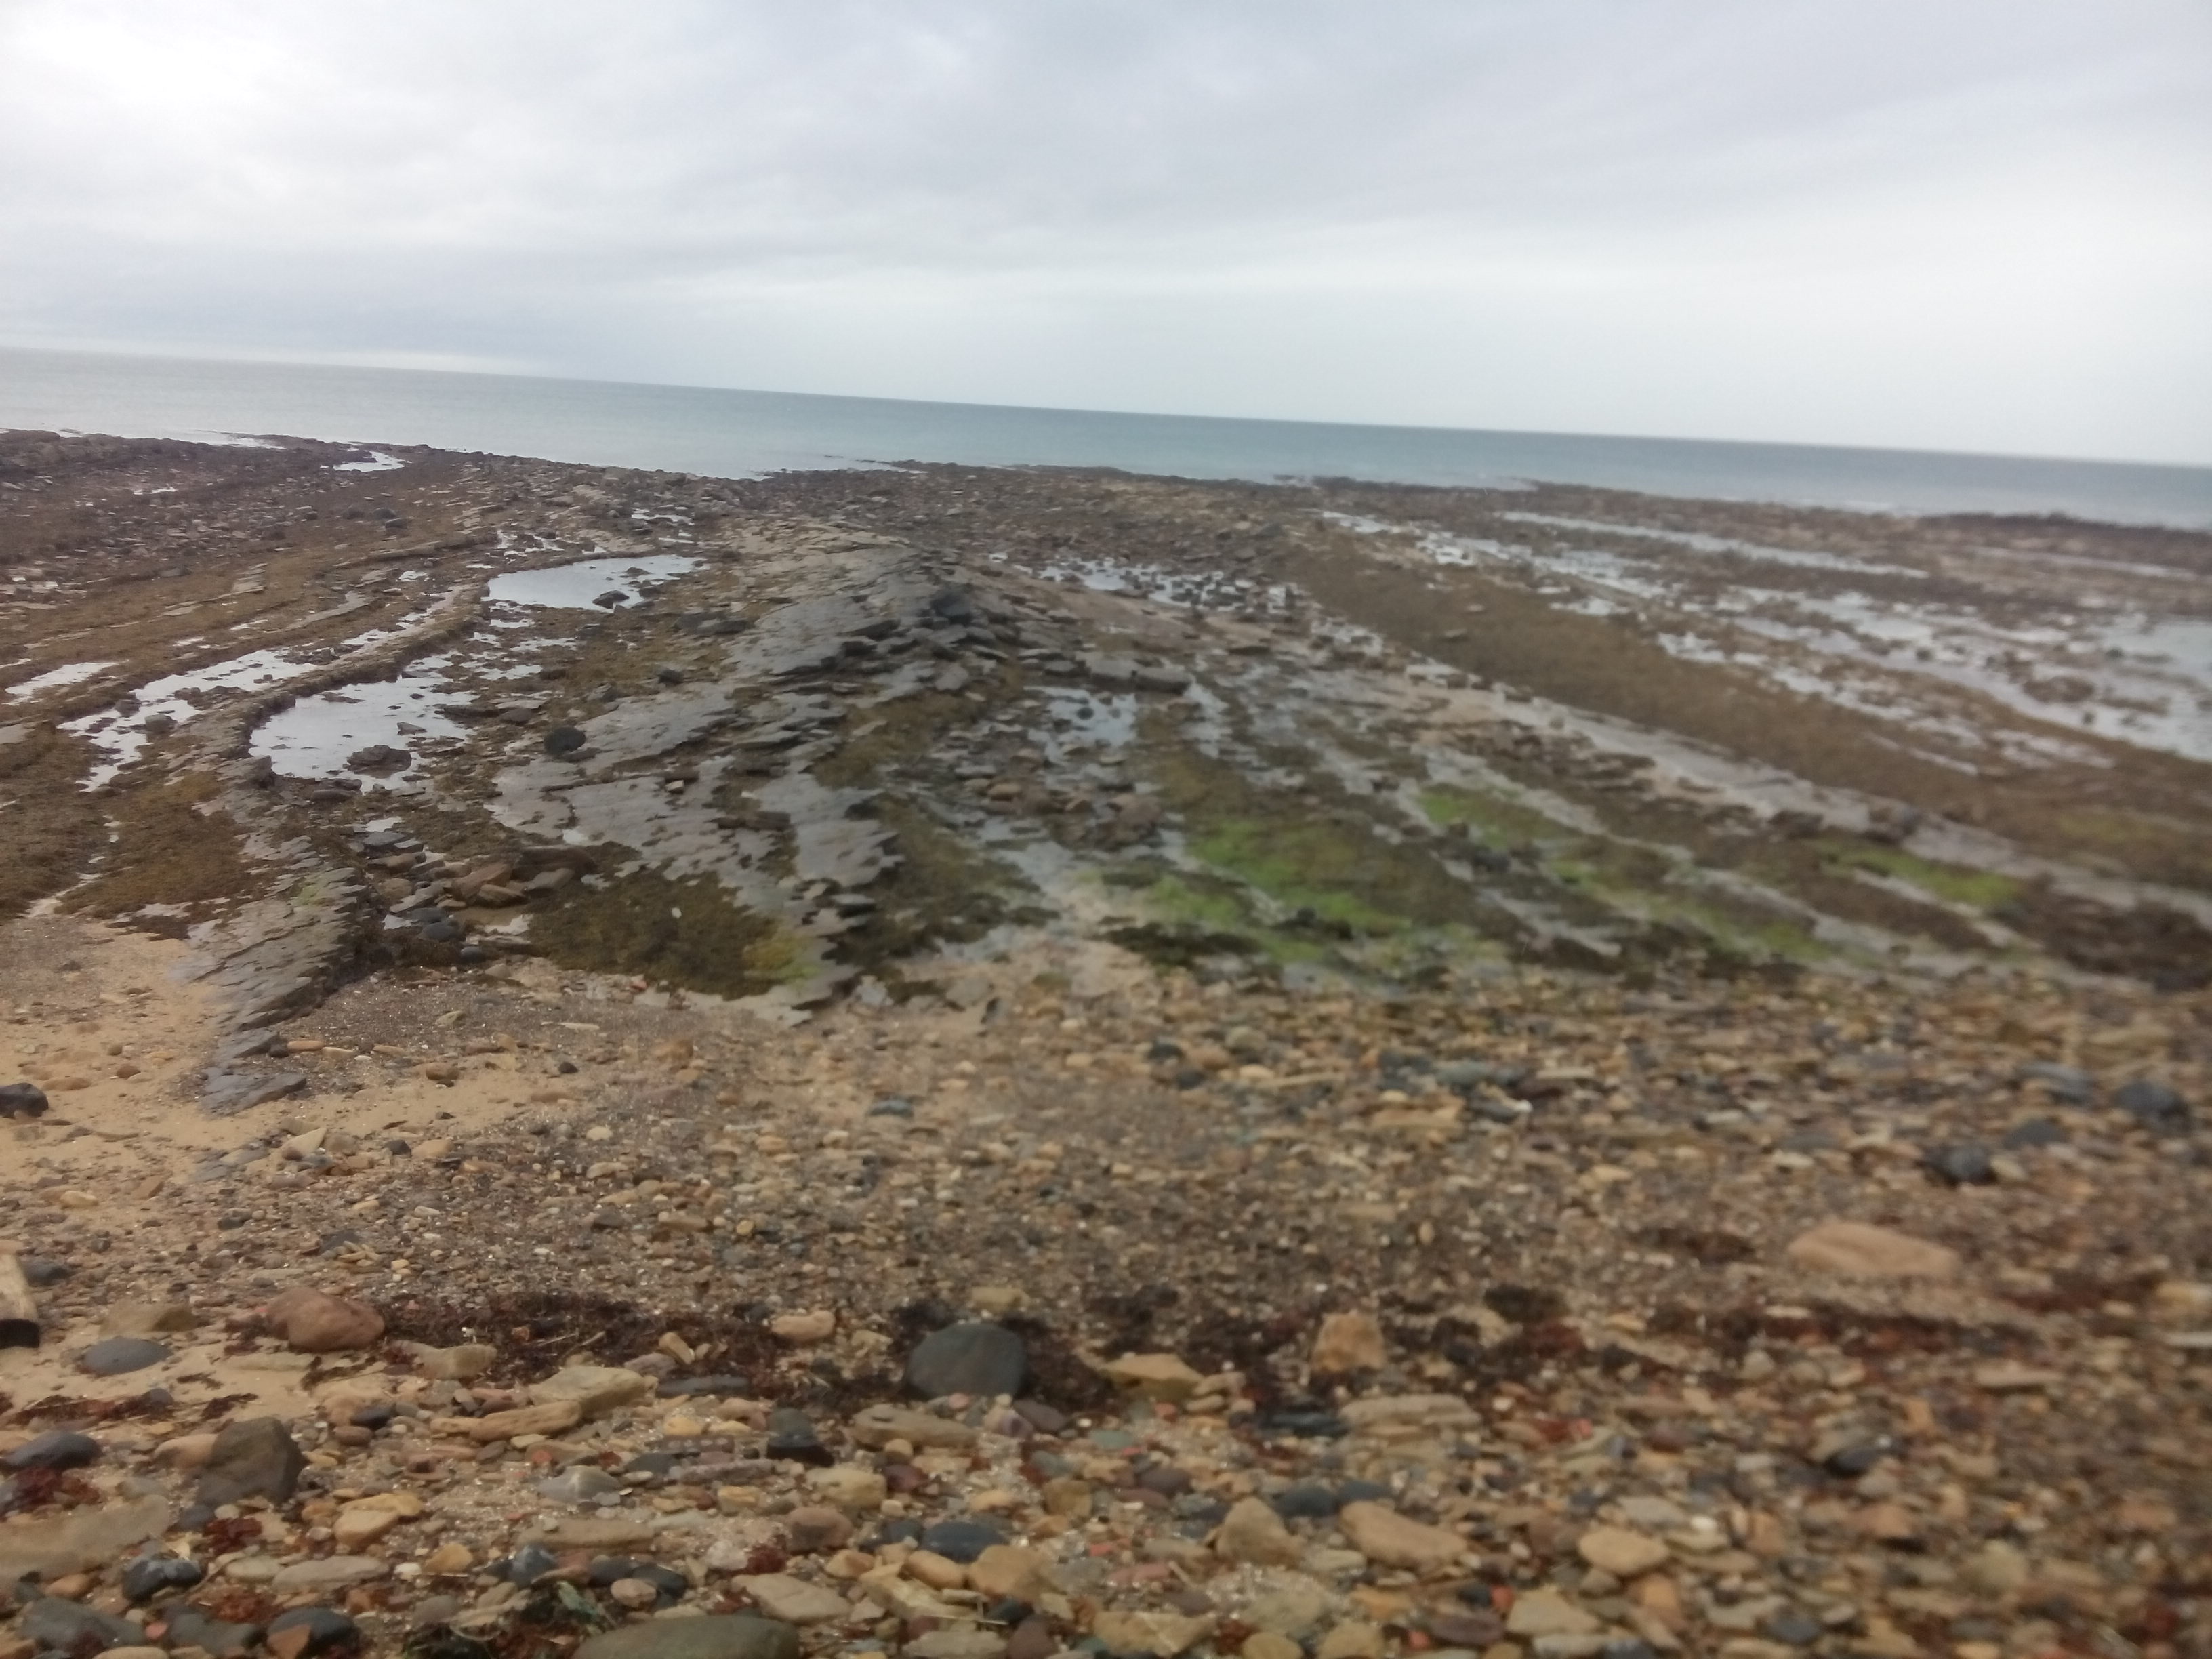 A vast rocky beach with clumps of seaweed and tidal pools stretches to a grey sea